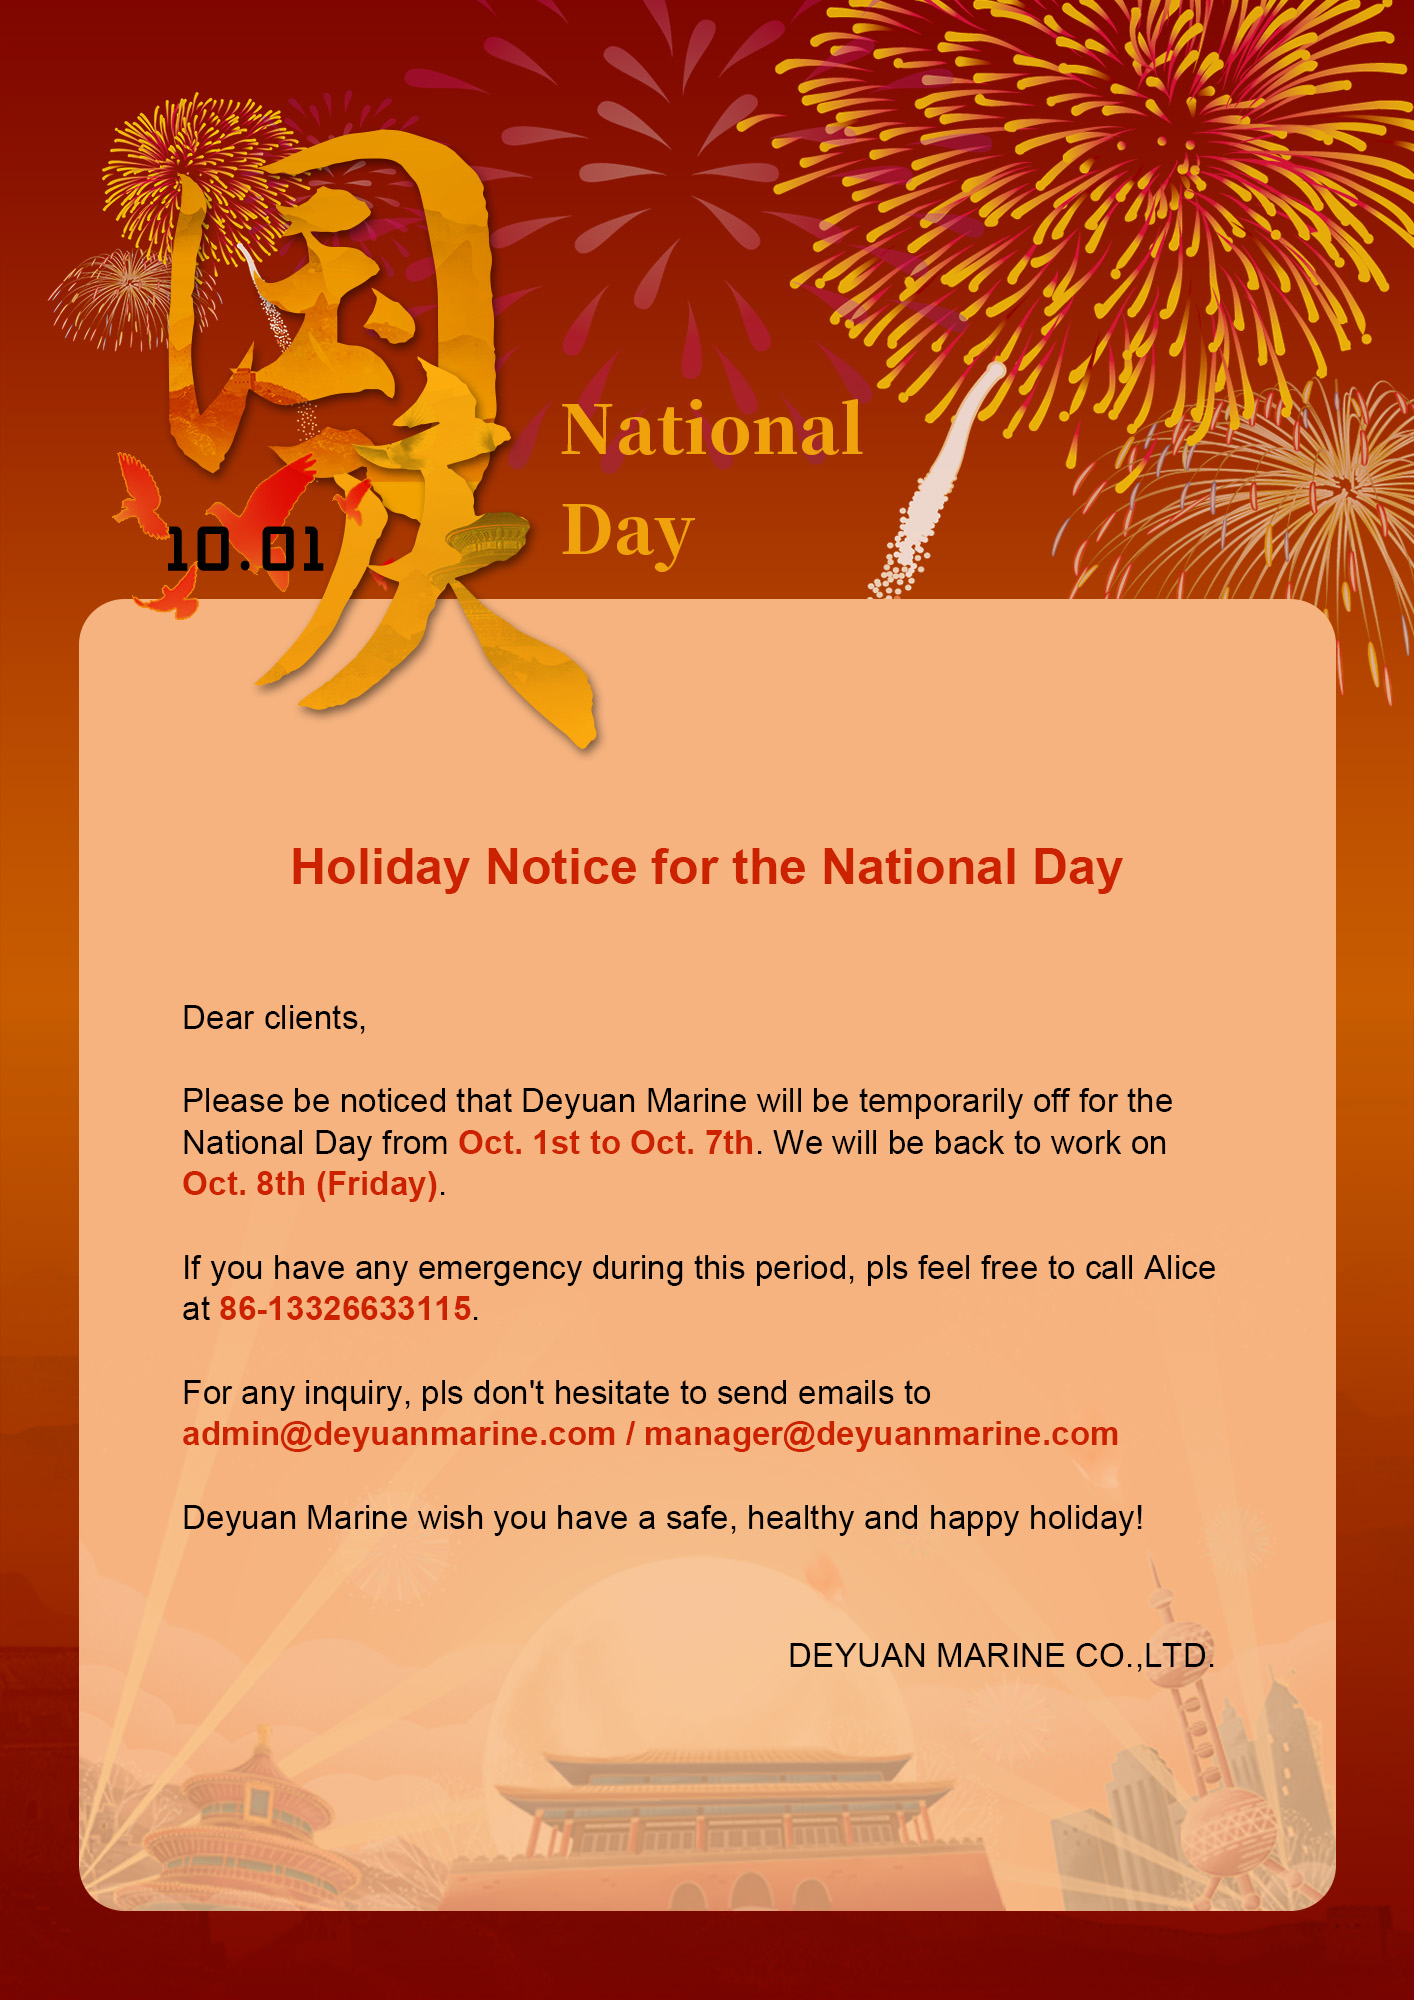 Deyuan Marine Holiday Notice For National Day